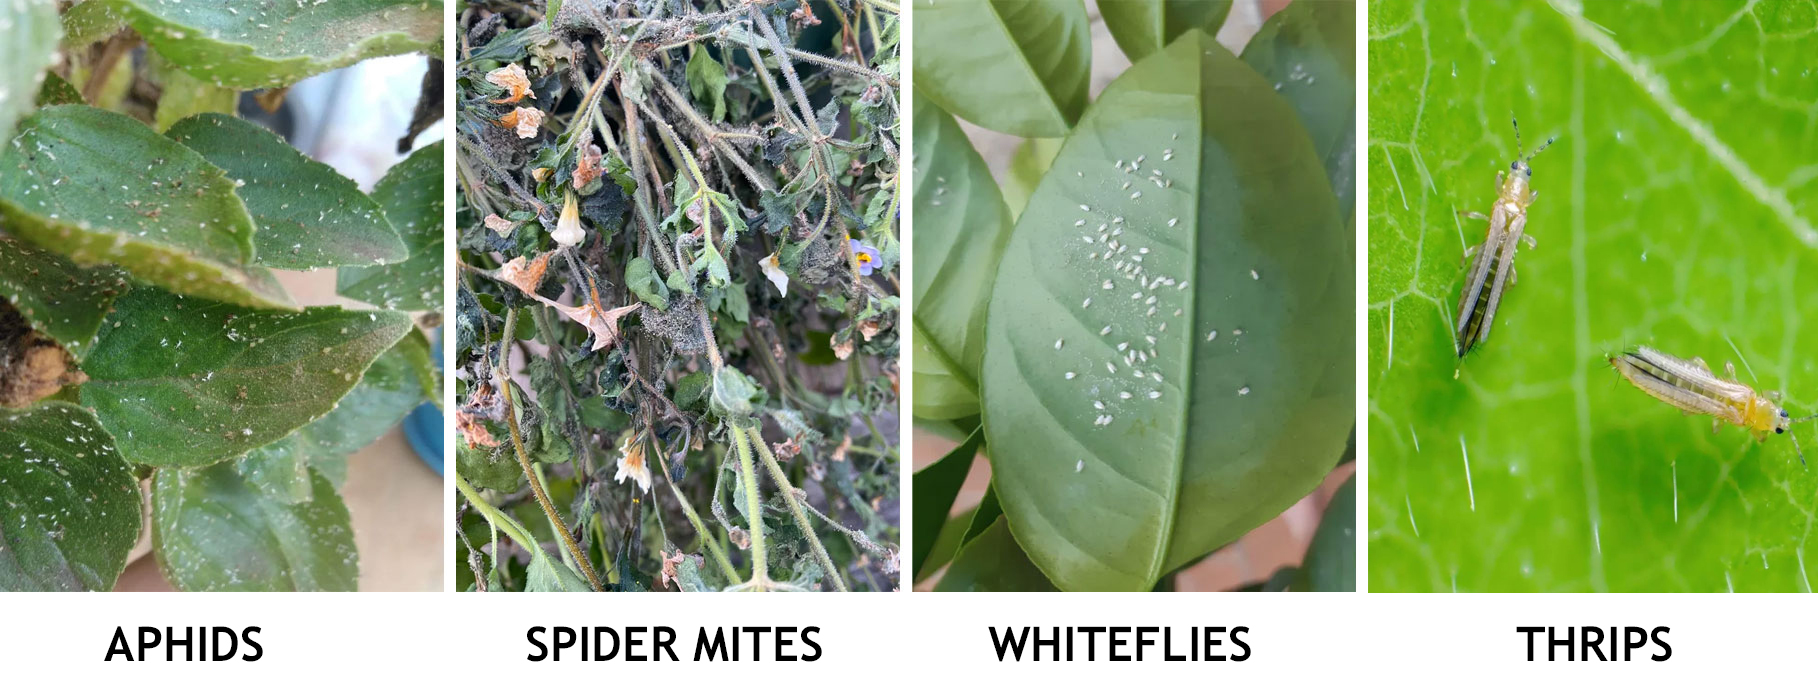 Images of plant pests.